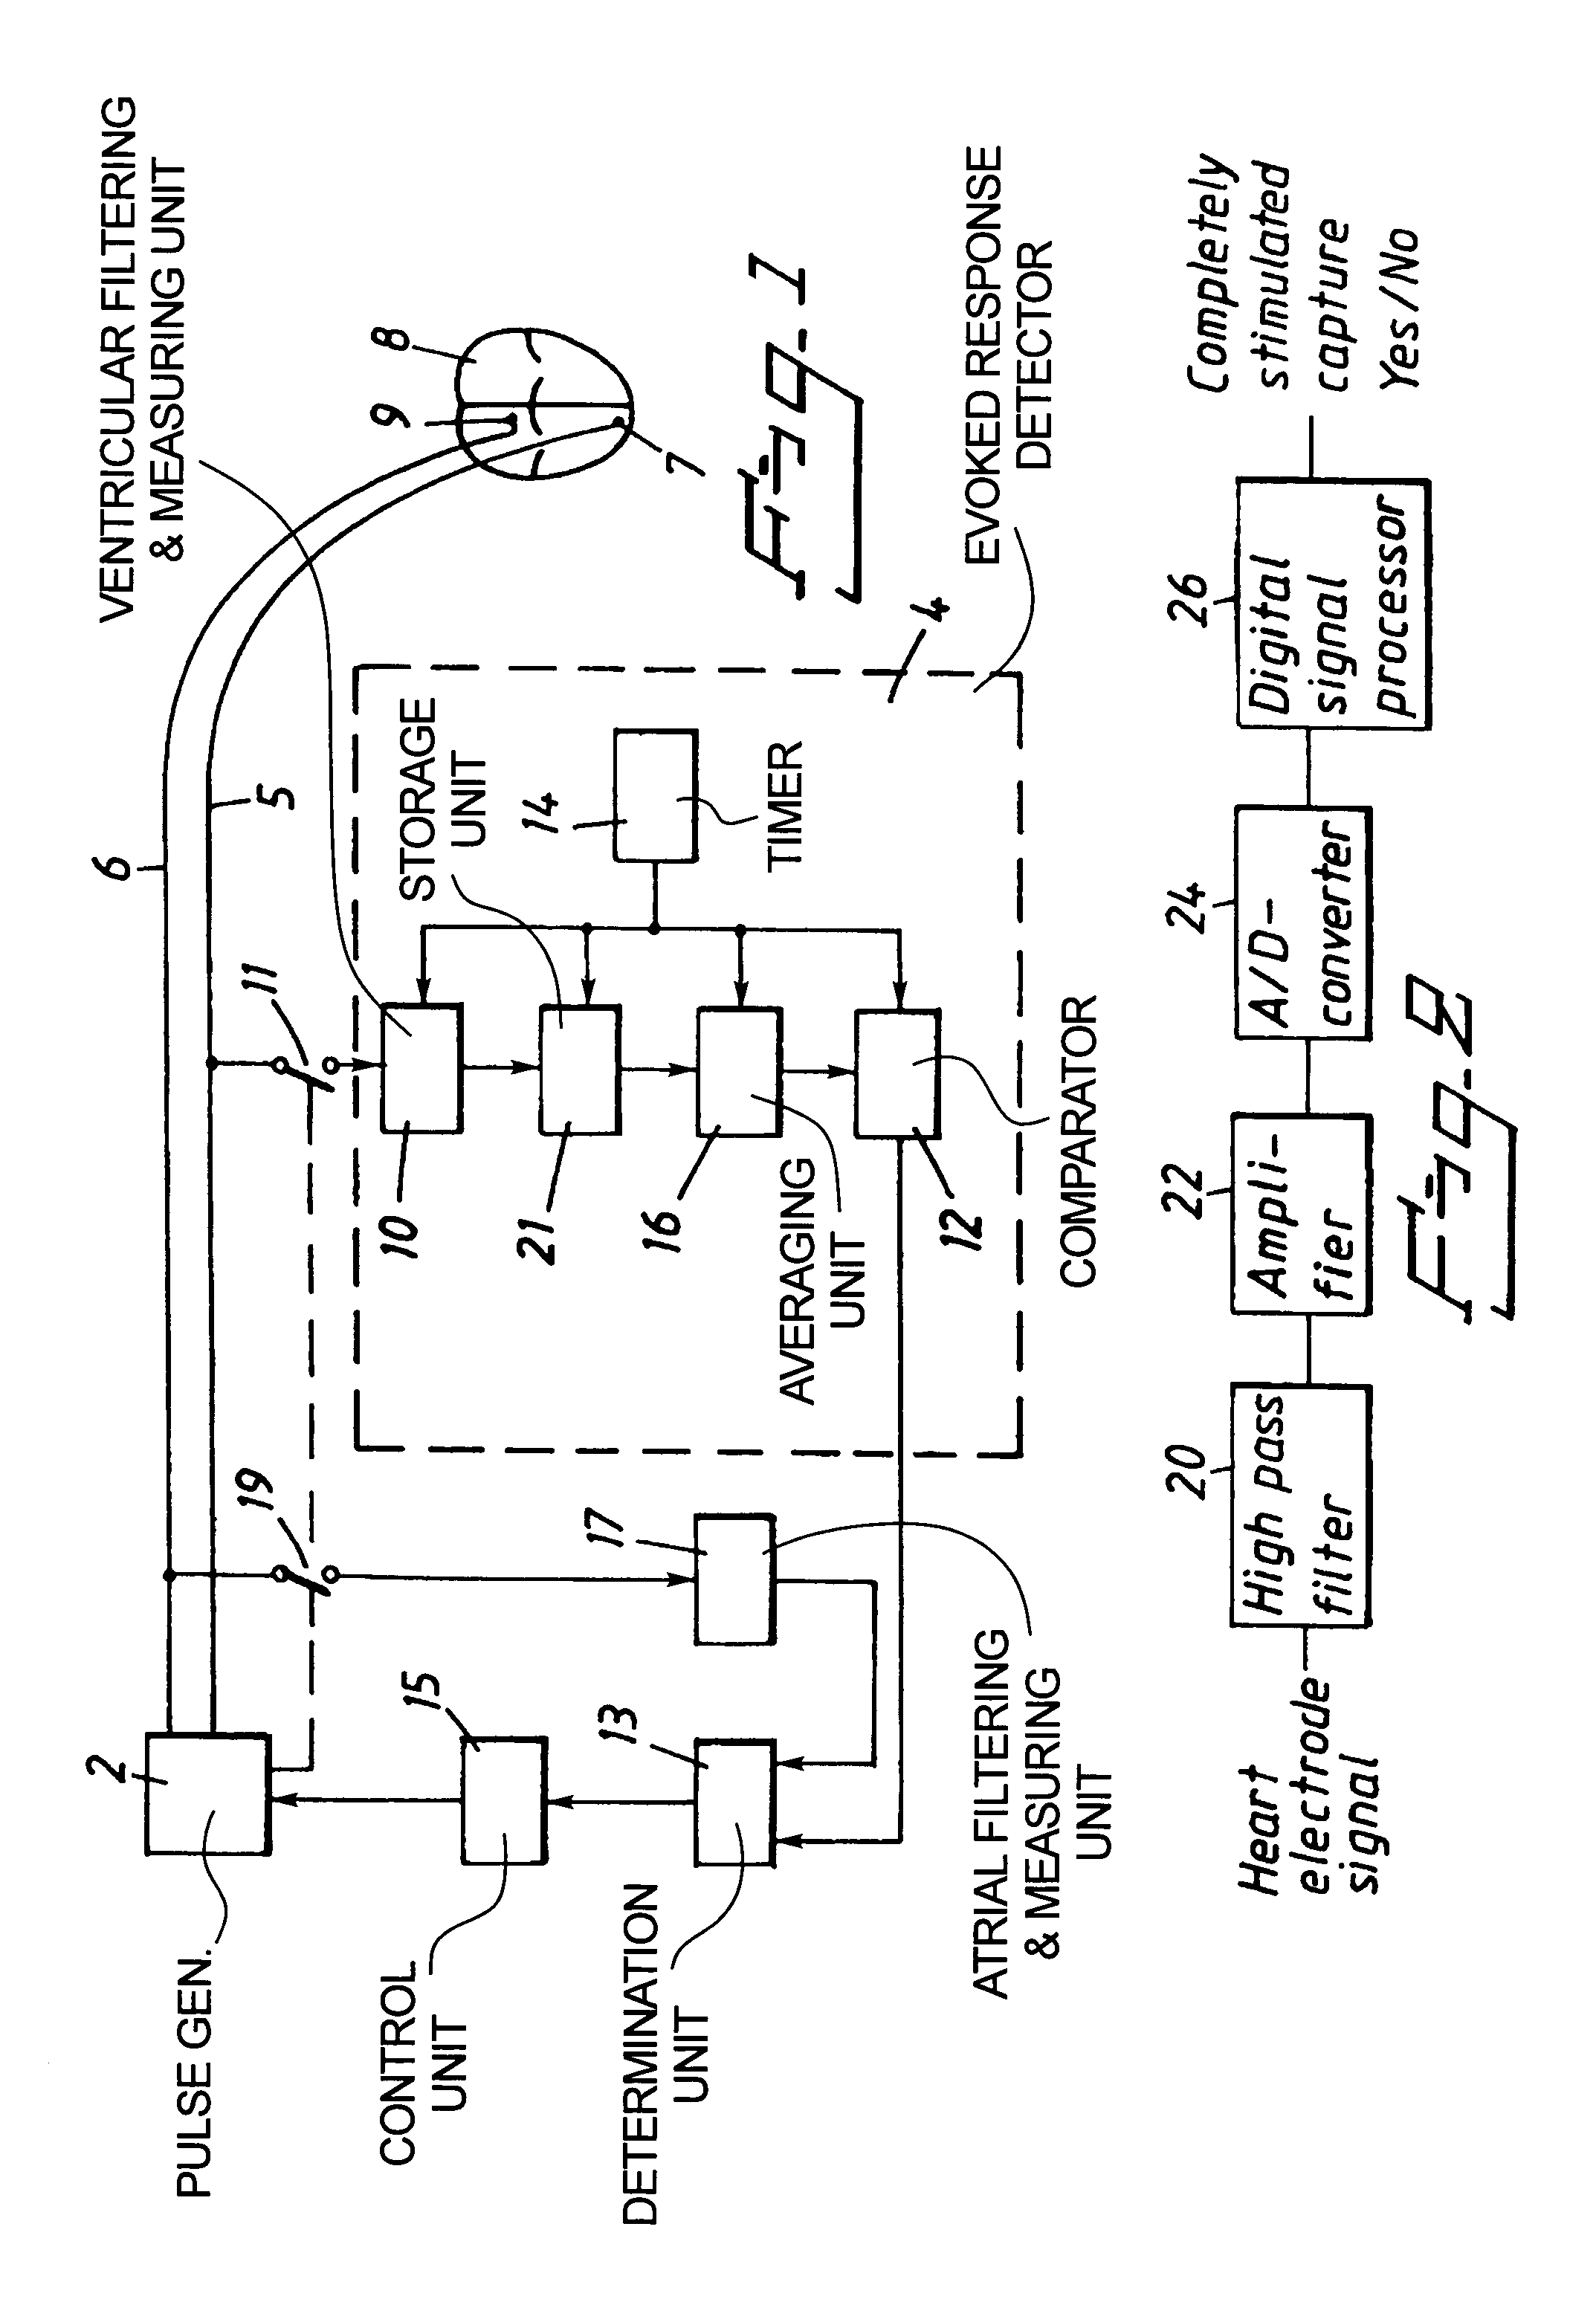 Dual chamber heart stimulator with evoked response detector